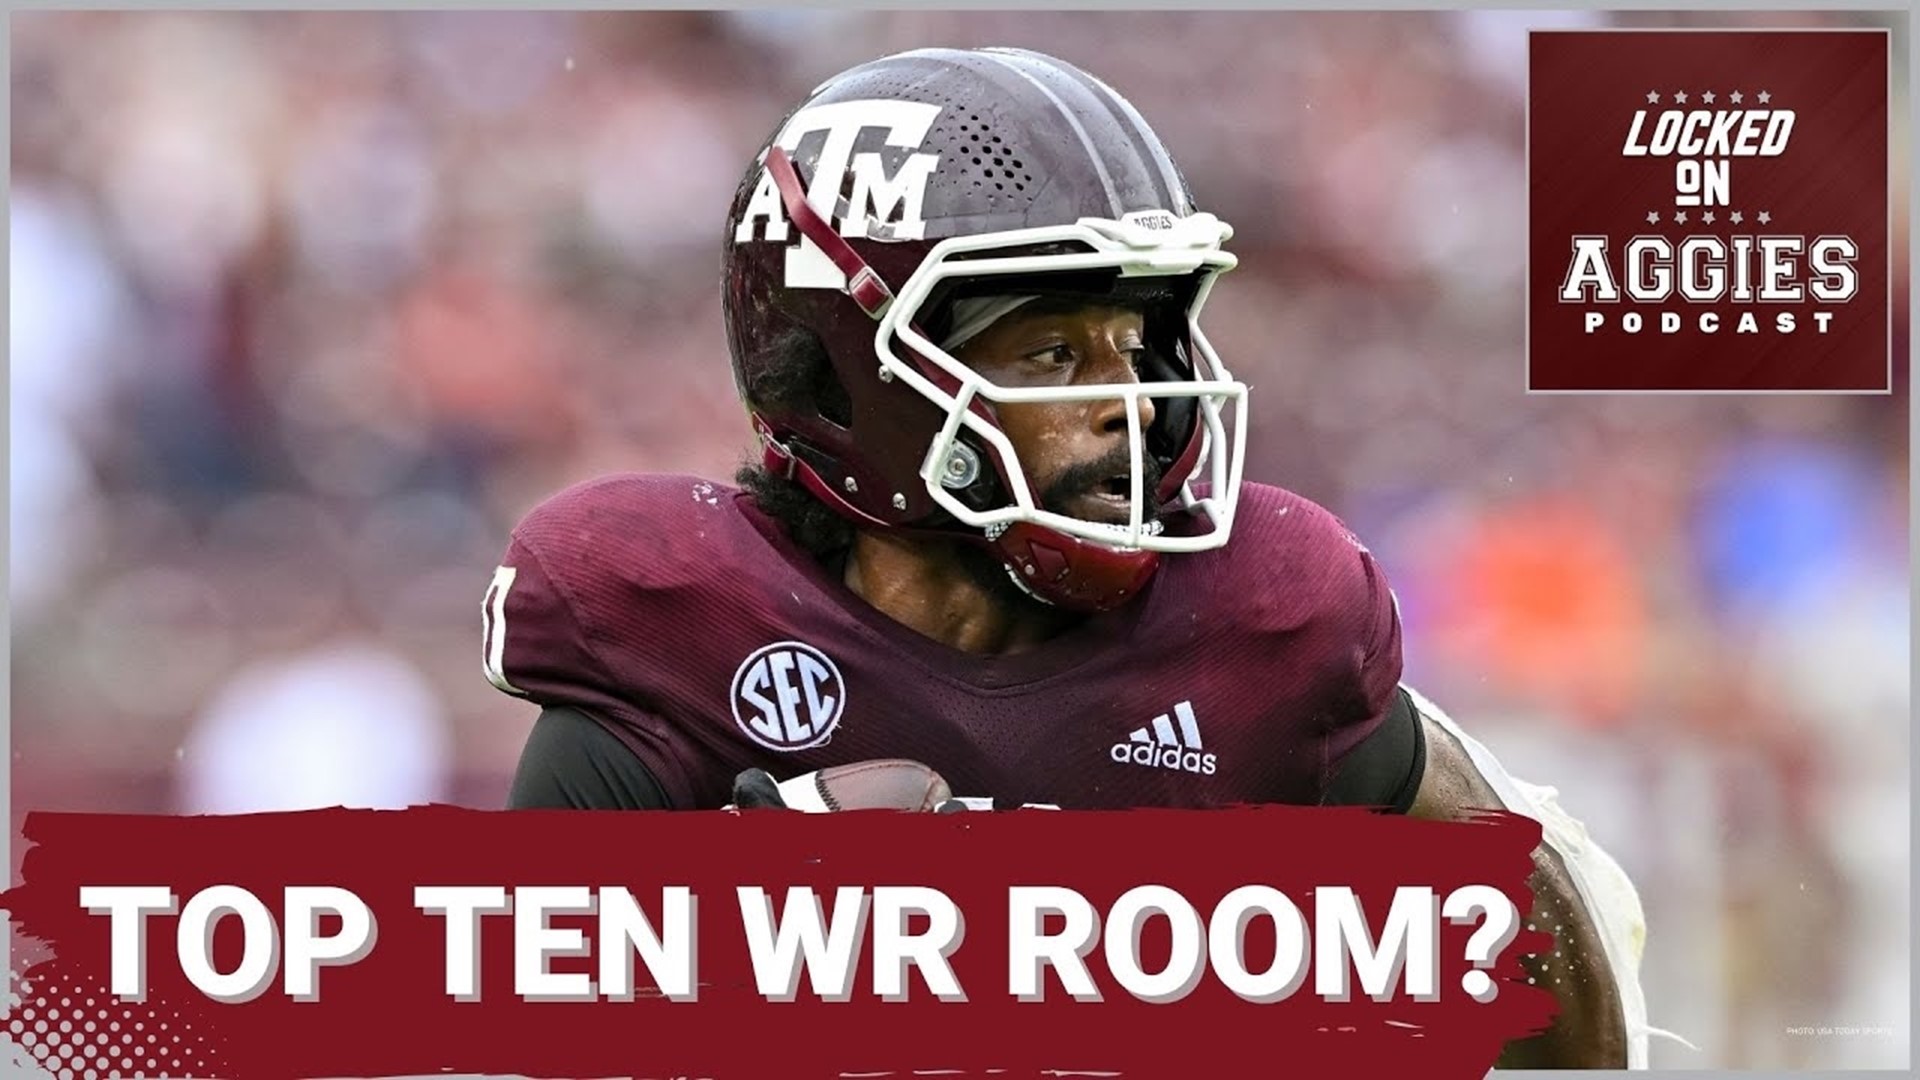 On this episode of Locked On Aggies, host Andrew Stefaniak discusses the Aggies wide receiver room and how it could be top ten in the nation.